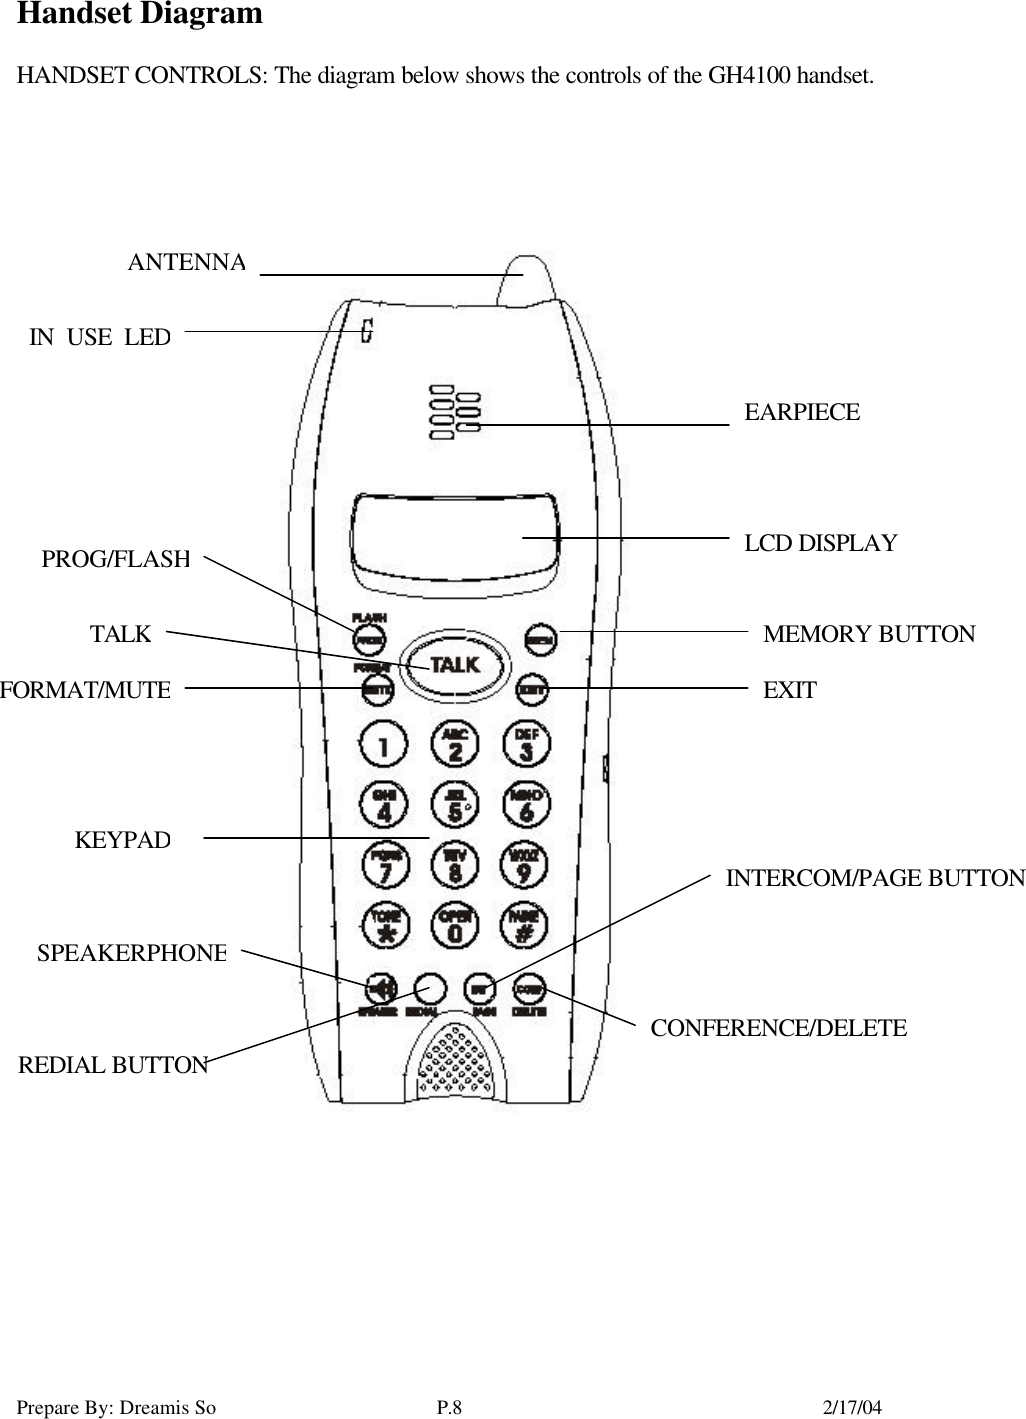 Prepare By: Dreamis So P.8    2/17/04 Handset Diagram  HANDSET CONTROLS: The diagram below shows the controls of the GH4100 handset.  ANTENNAEARPIECE LCD DISPLAY IN USE LEDPROG/FLASHFORMAT/MUTETALKMEMORY BUTTON EXIT SPEAKERPHONEKEYPADREDIAL BUTTONINTERCOM/PAGE BUTTON CONFERENCE/DELETE 